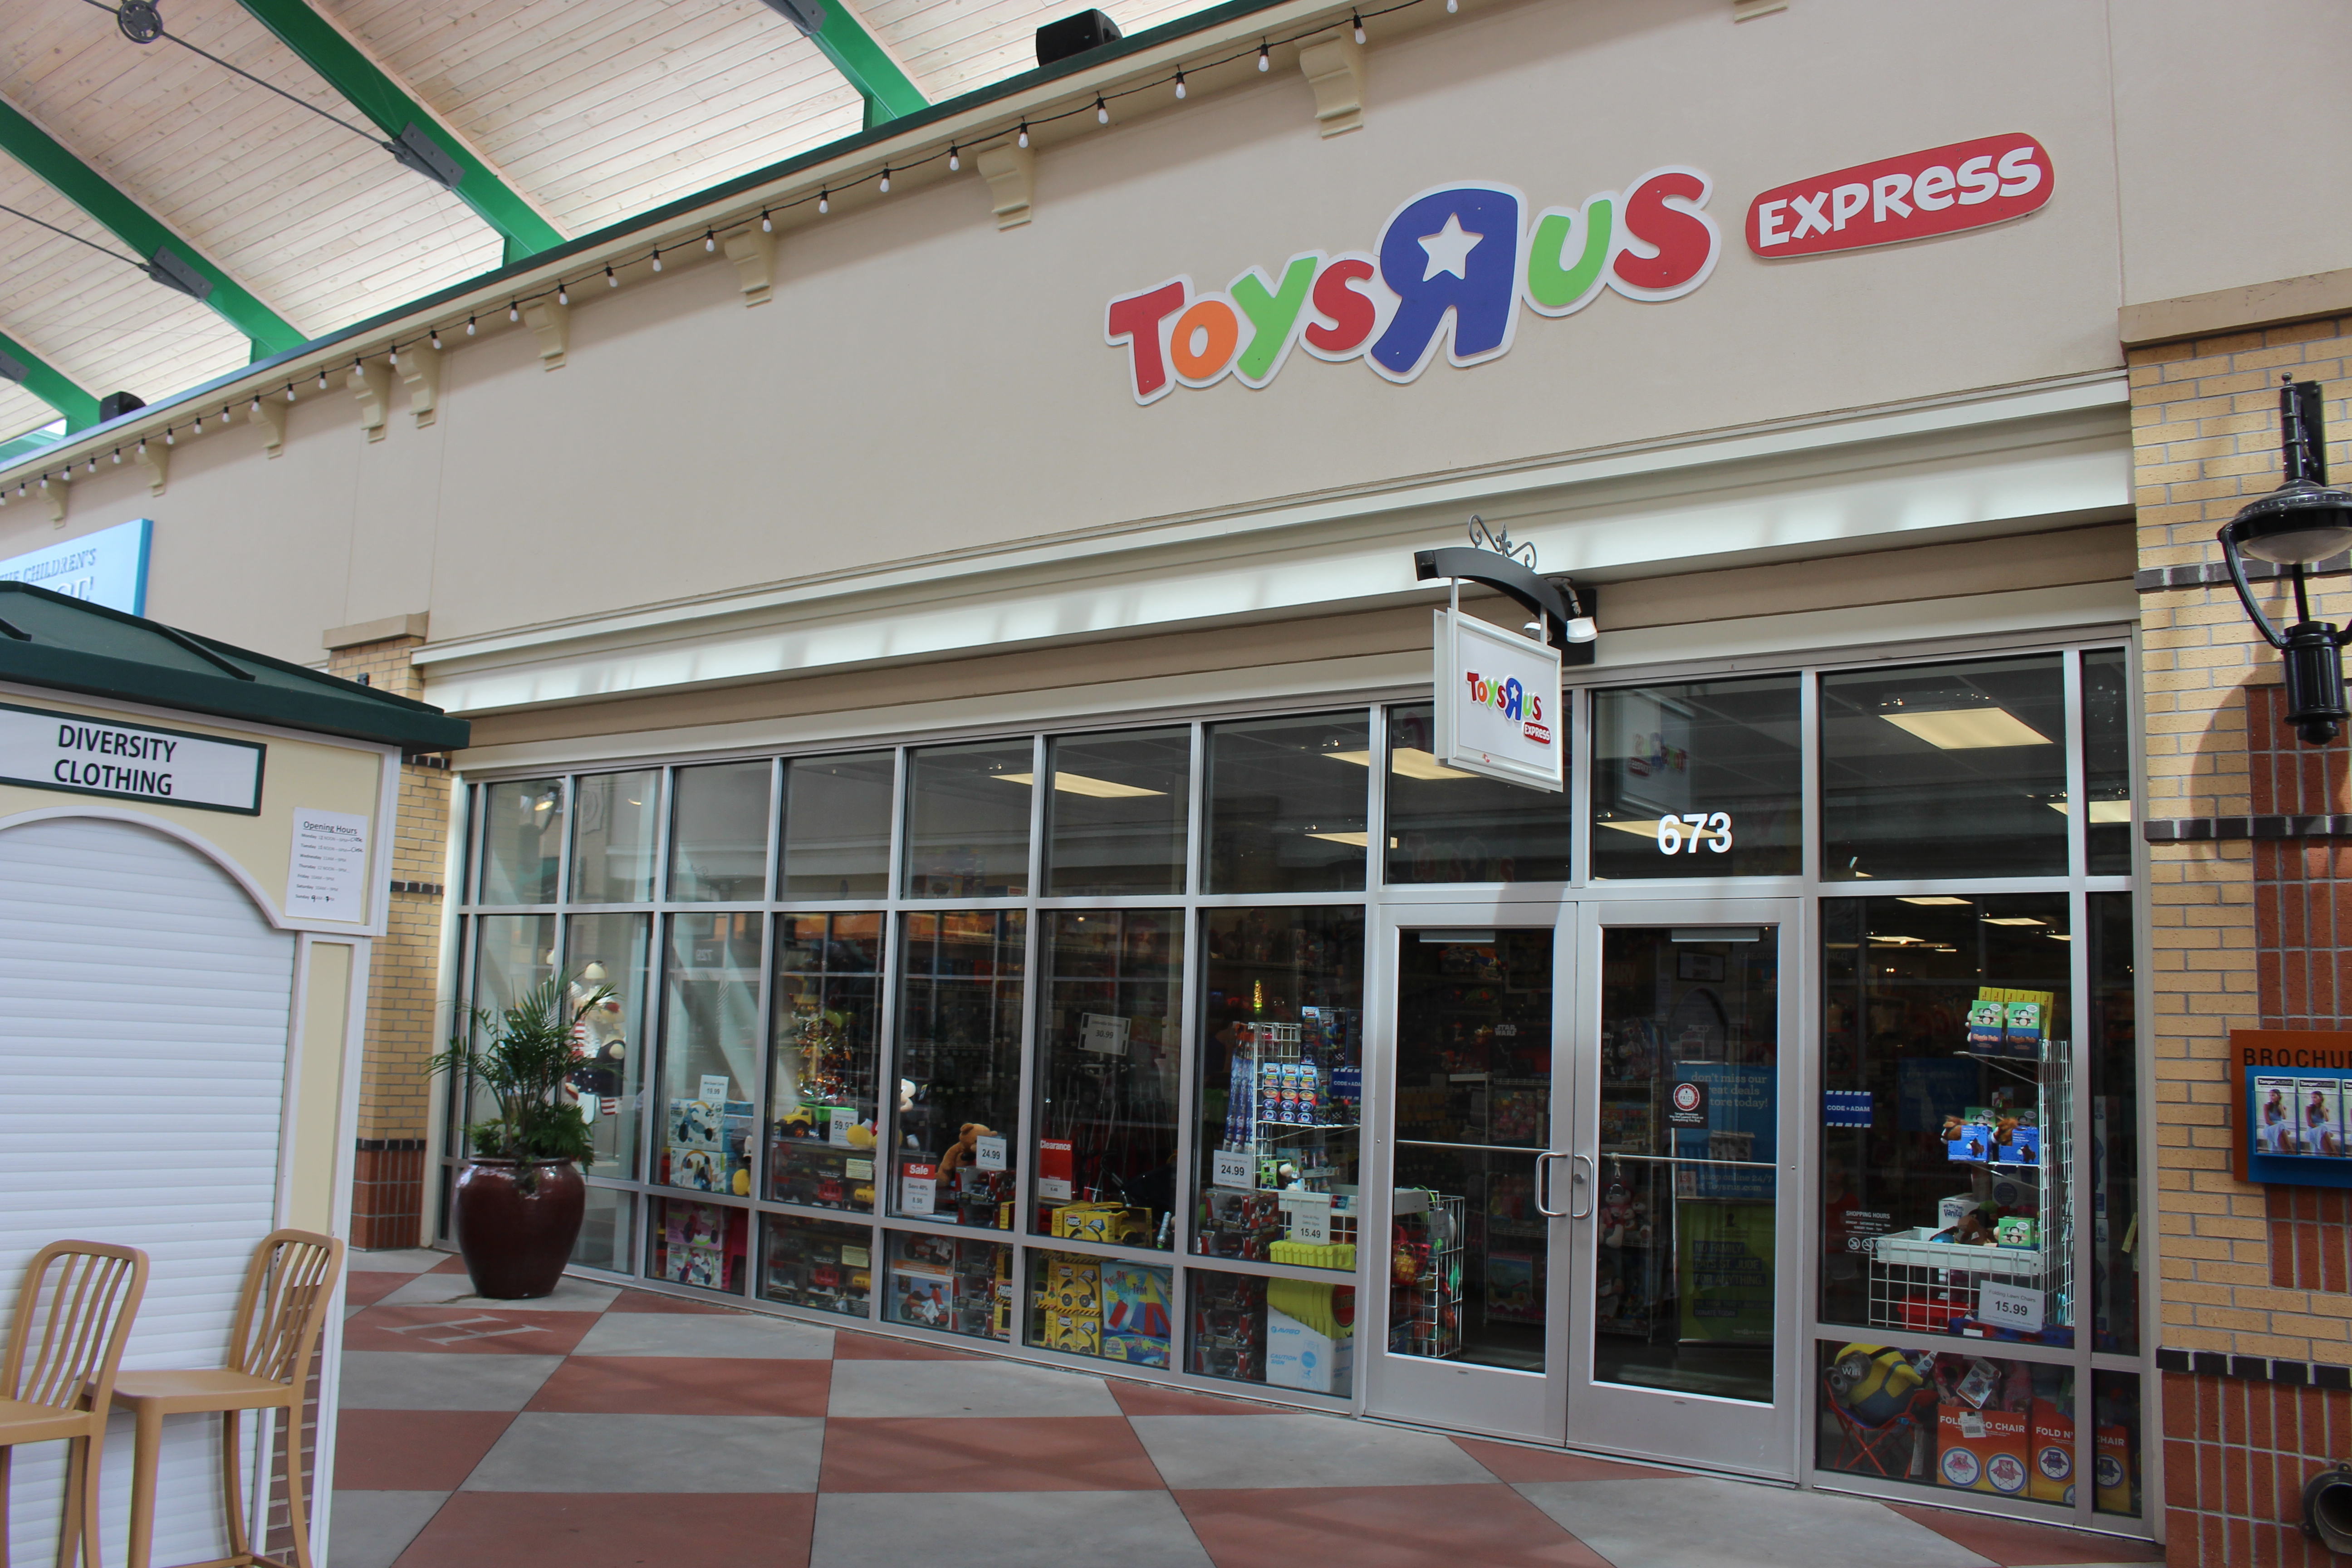 File:Toys R Us Express, Tanger Outlets Savannah.jpg - Wikimedia ...